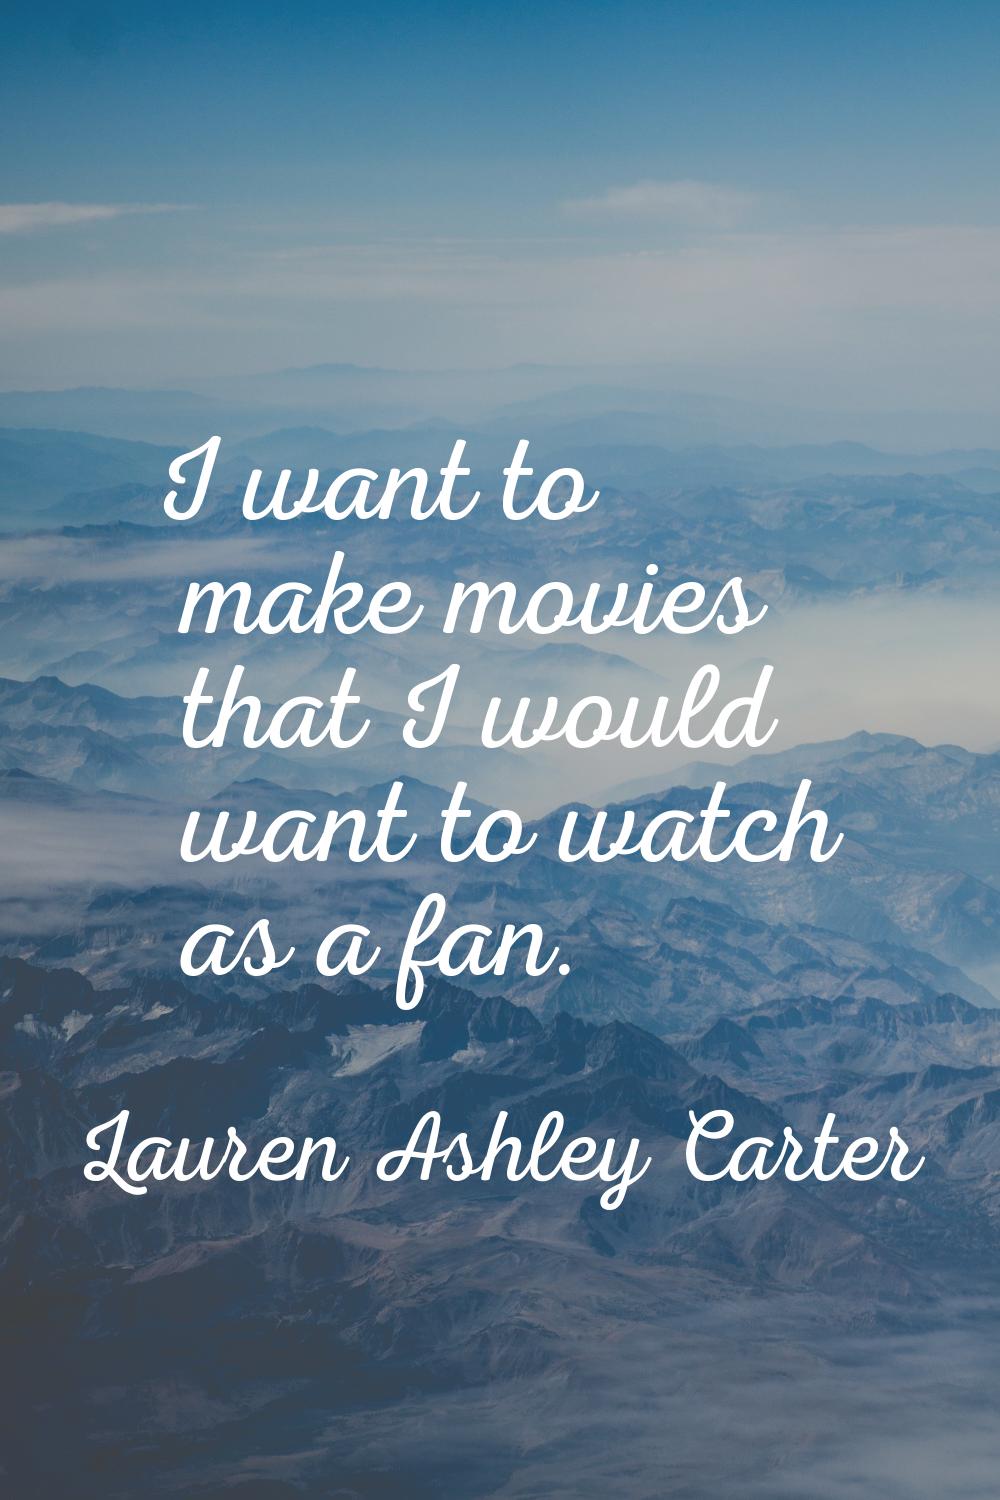 I want to make movies that I would want to watch as a fan.